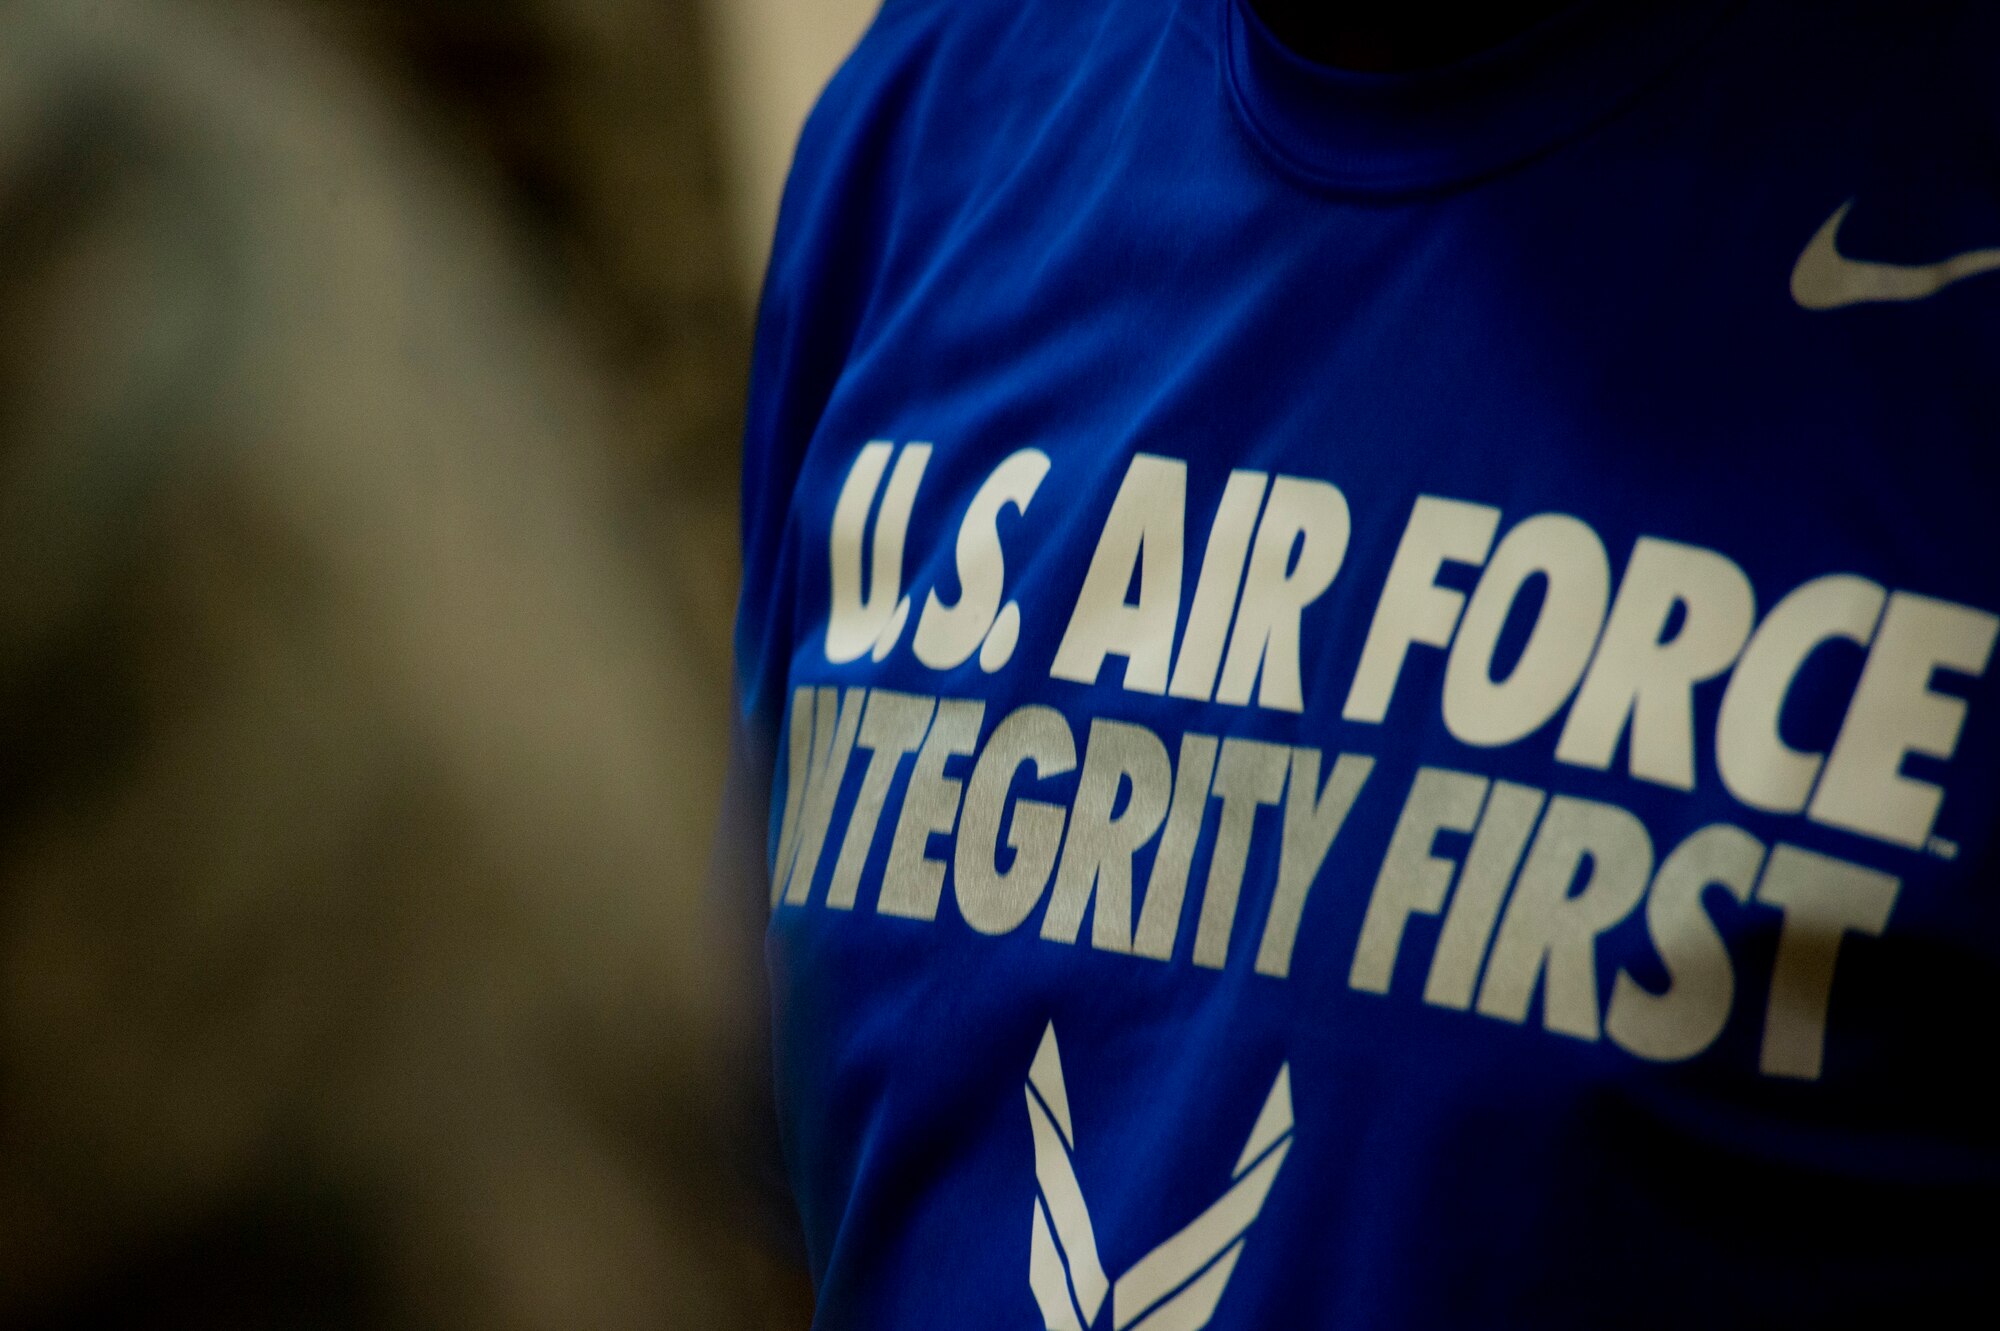 An Air Force logo is displayed on the shirt belonging to retired U.S. Air Force Chief Master Sgt. Juan Lewis, known as the Fired Up Chief, as he speaks to NCOs during a Tier II private organization meeting at the Brick House on Spangdahlem Air Base, Germany, July 12, 2016. Lewis spoke to NCOs about PEP, meaning pride, enthusiasm and passion, as part of his pep rally presentation. (U.S. Air Force Photo by Staff Sgt. Joe W. McFadden/Released)